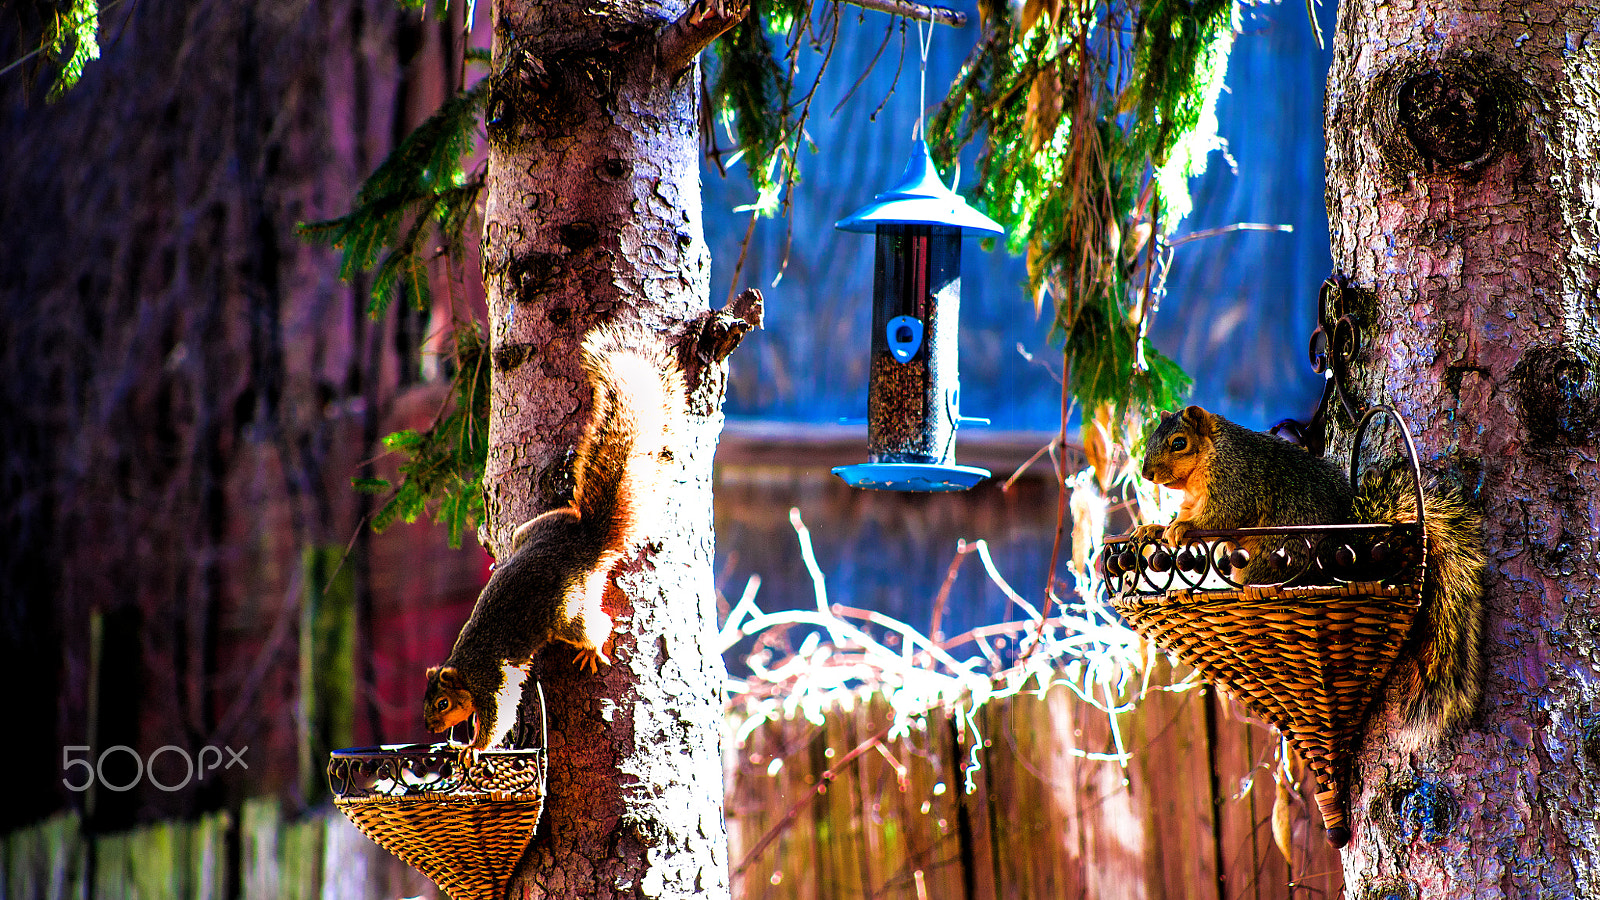 Sony a7 + Tamron 18-270mm F3.5-6.3 Di II PZD sample photo. Squirrels eating photography